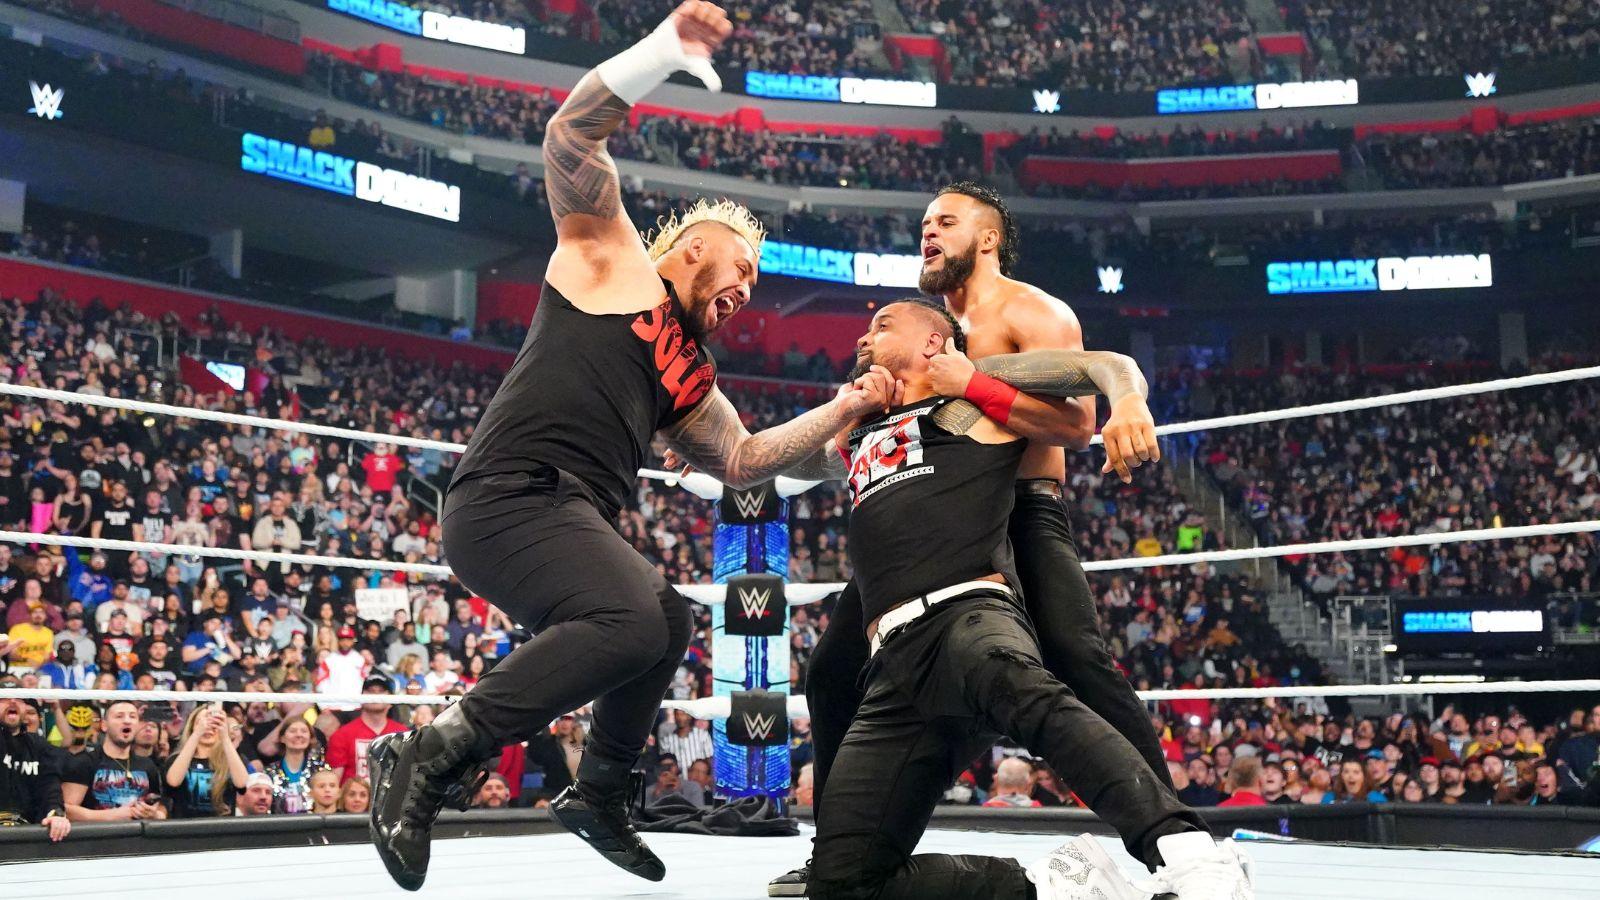 Jimmy Uso (center) being attacked by Solo Sikoa (left) and Tama Tonga (right) on the April 12 episode of SmackDown.